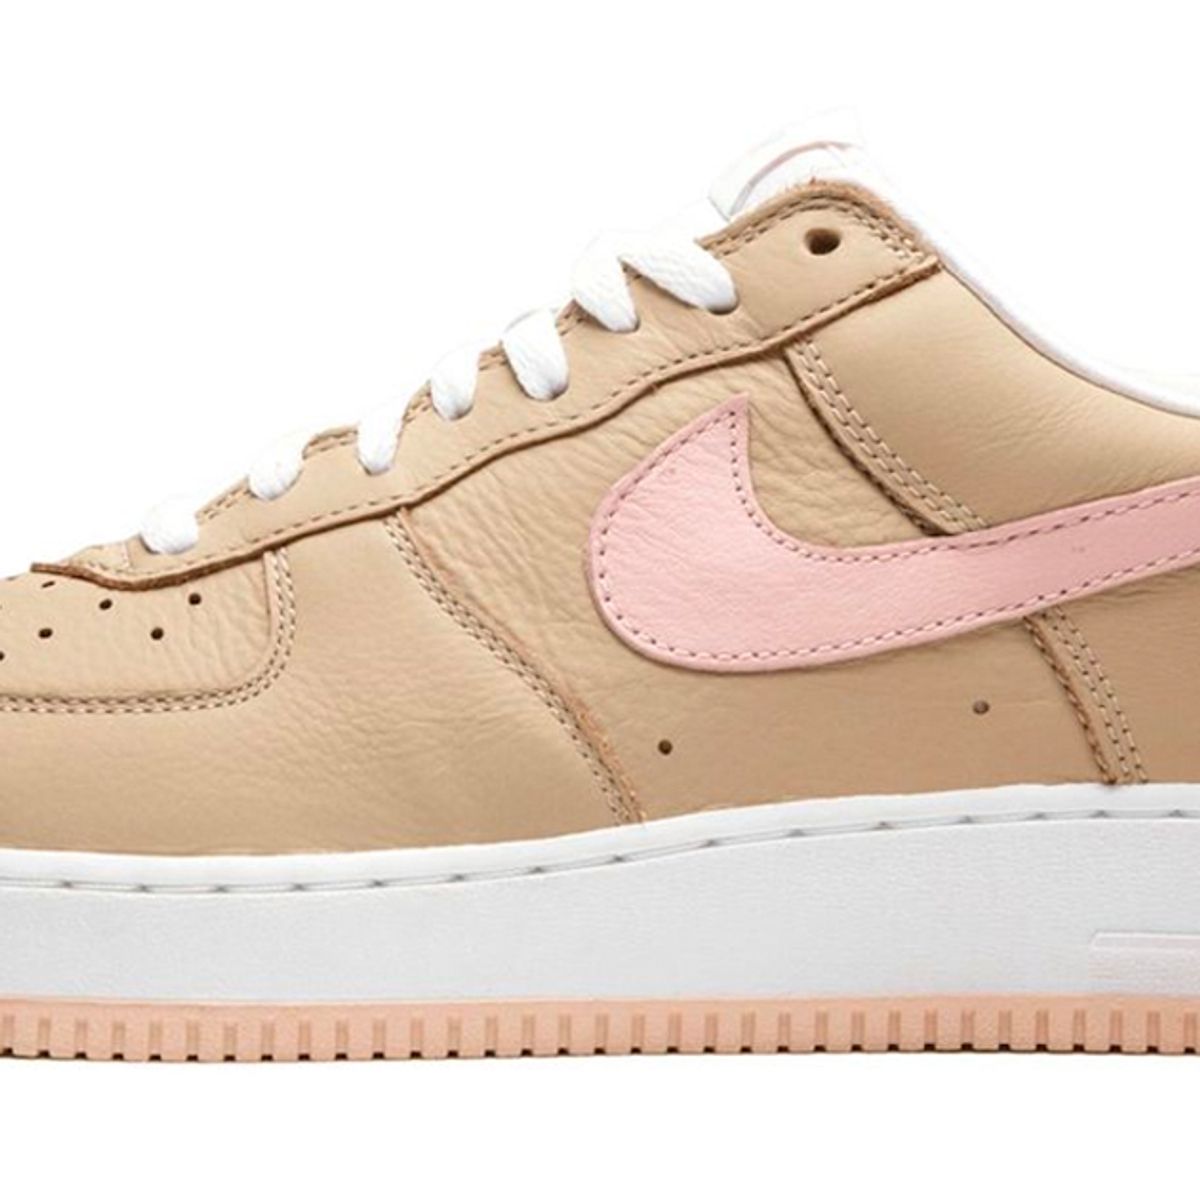 A New Linen Nike Air Force 1 Low is Available Now